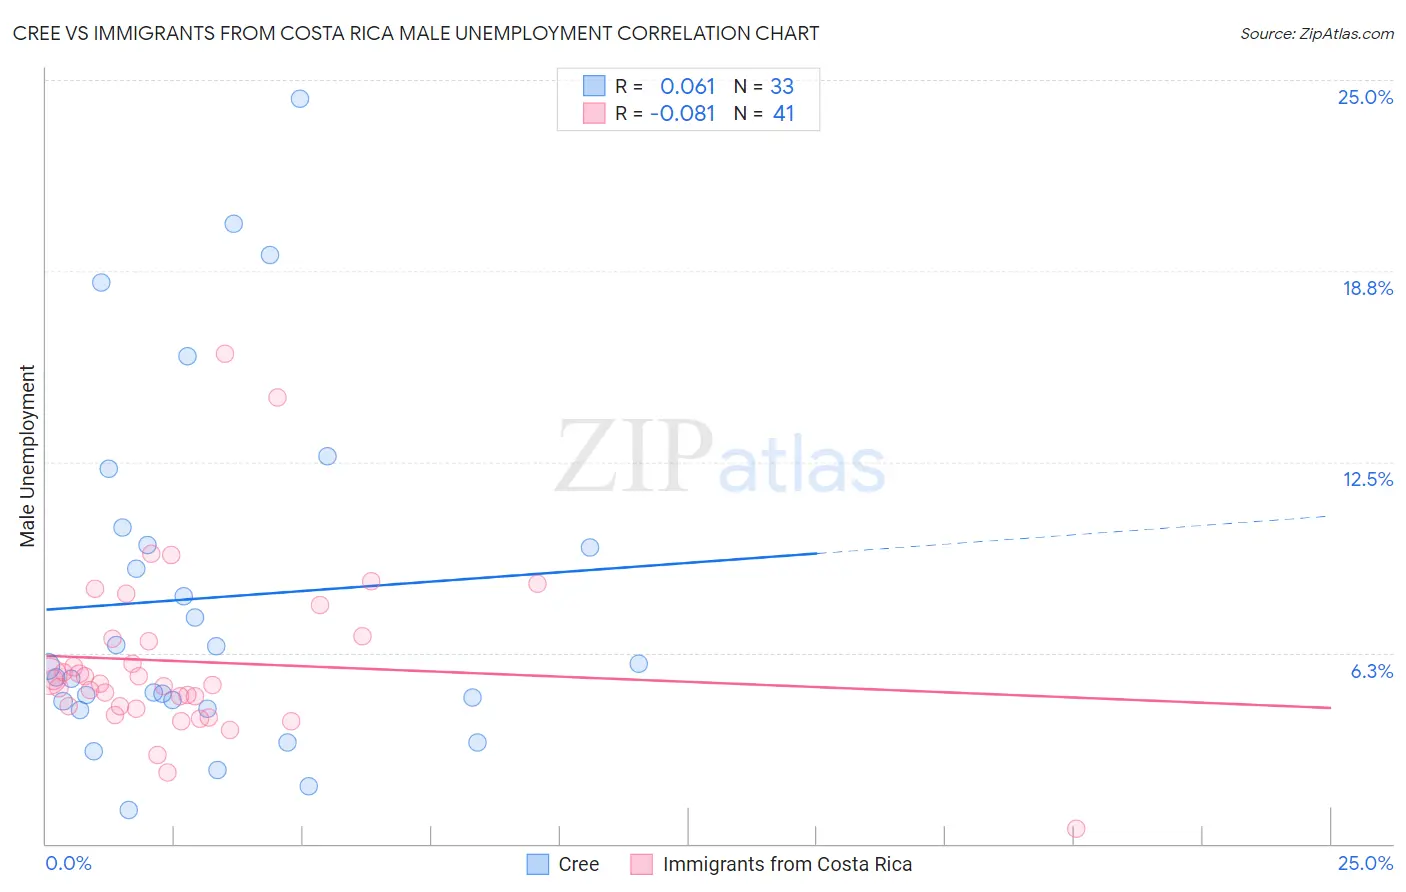 Cree vs Immigrants from Costa Rica Male Unemployment